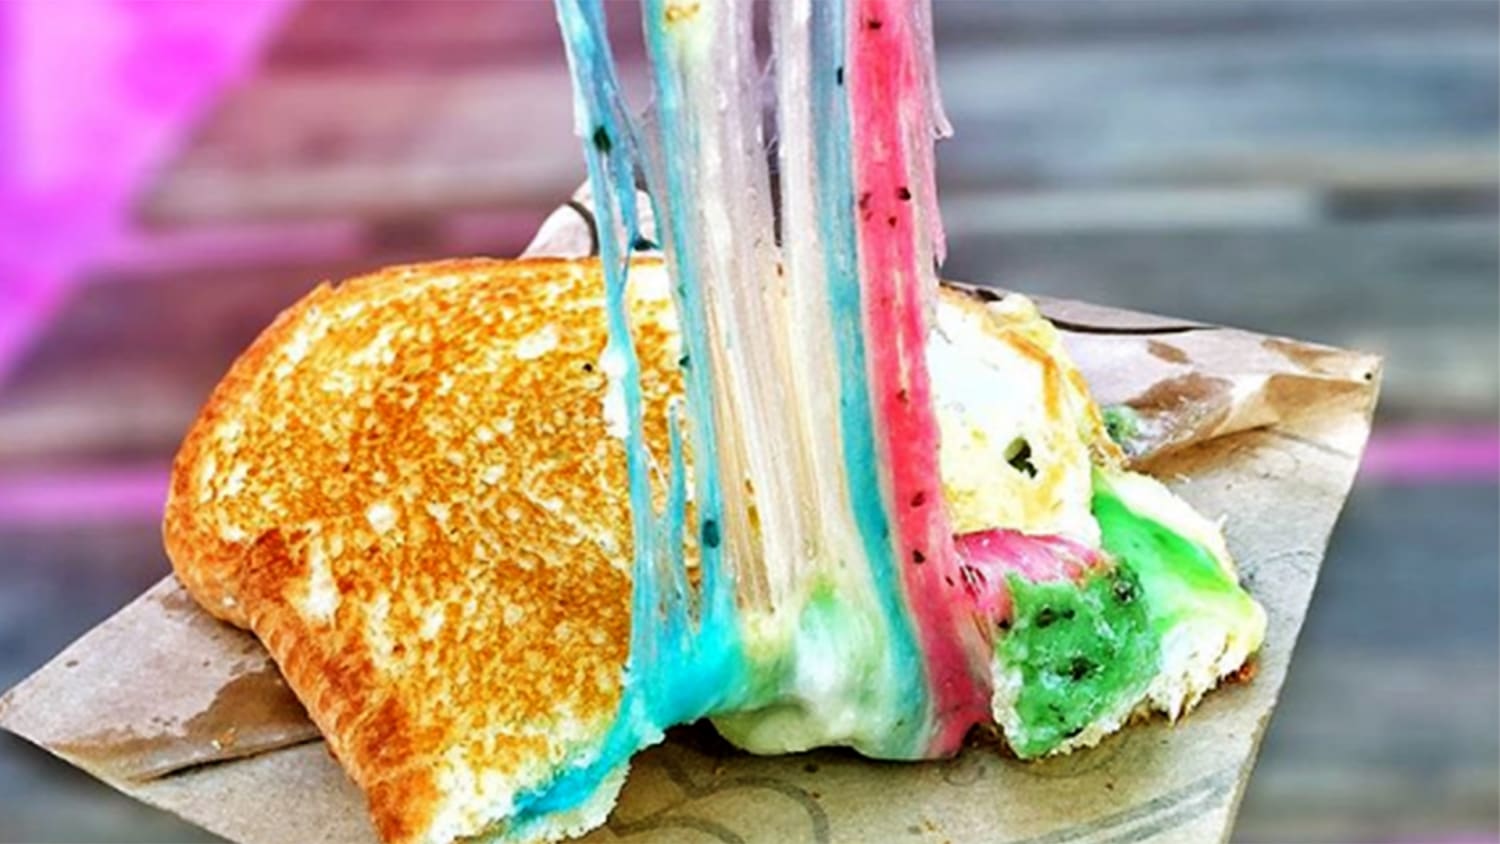 Rainbow grilled cheese sandwiches are going viral - TODAY.com